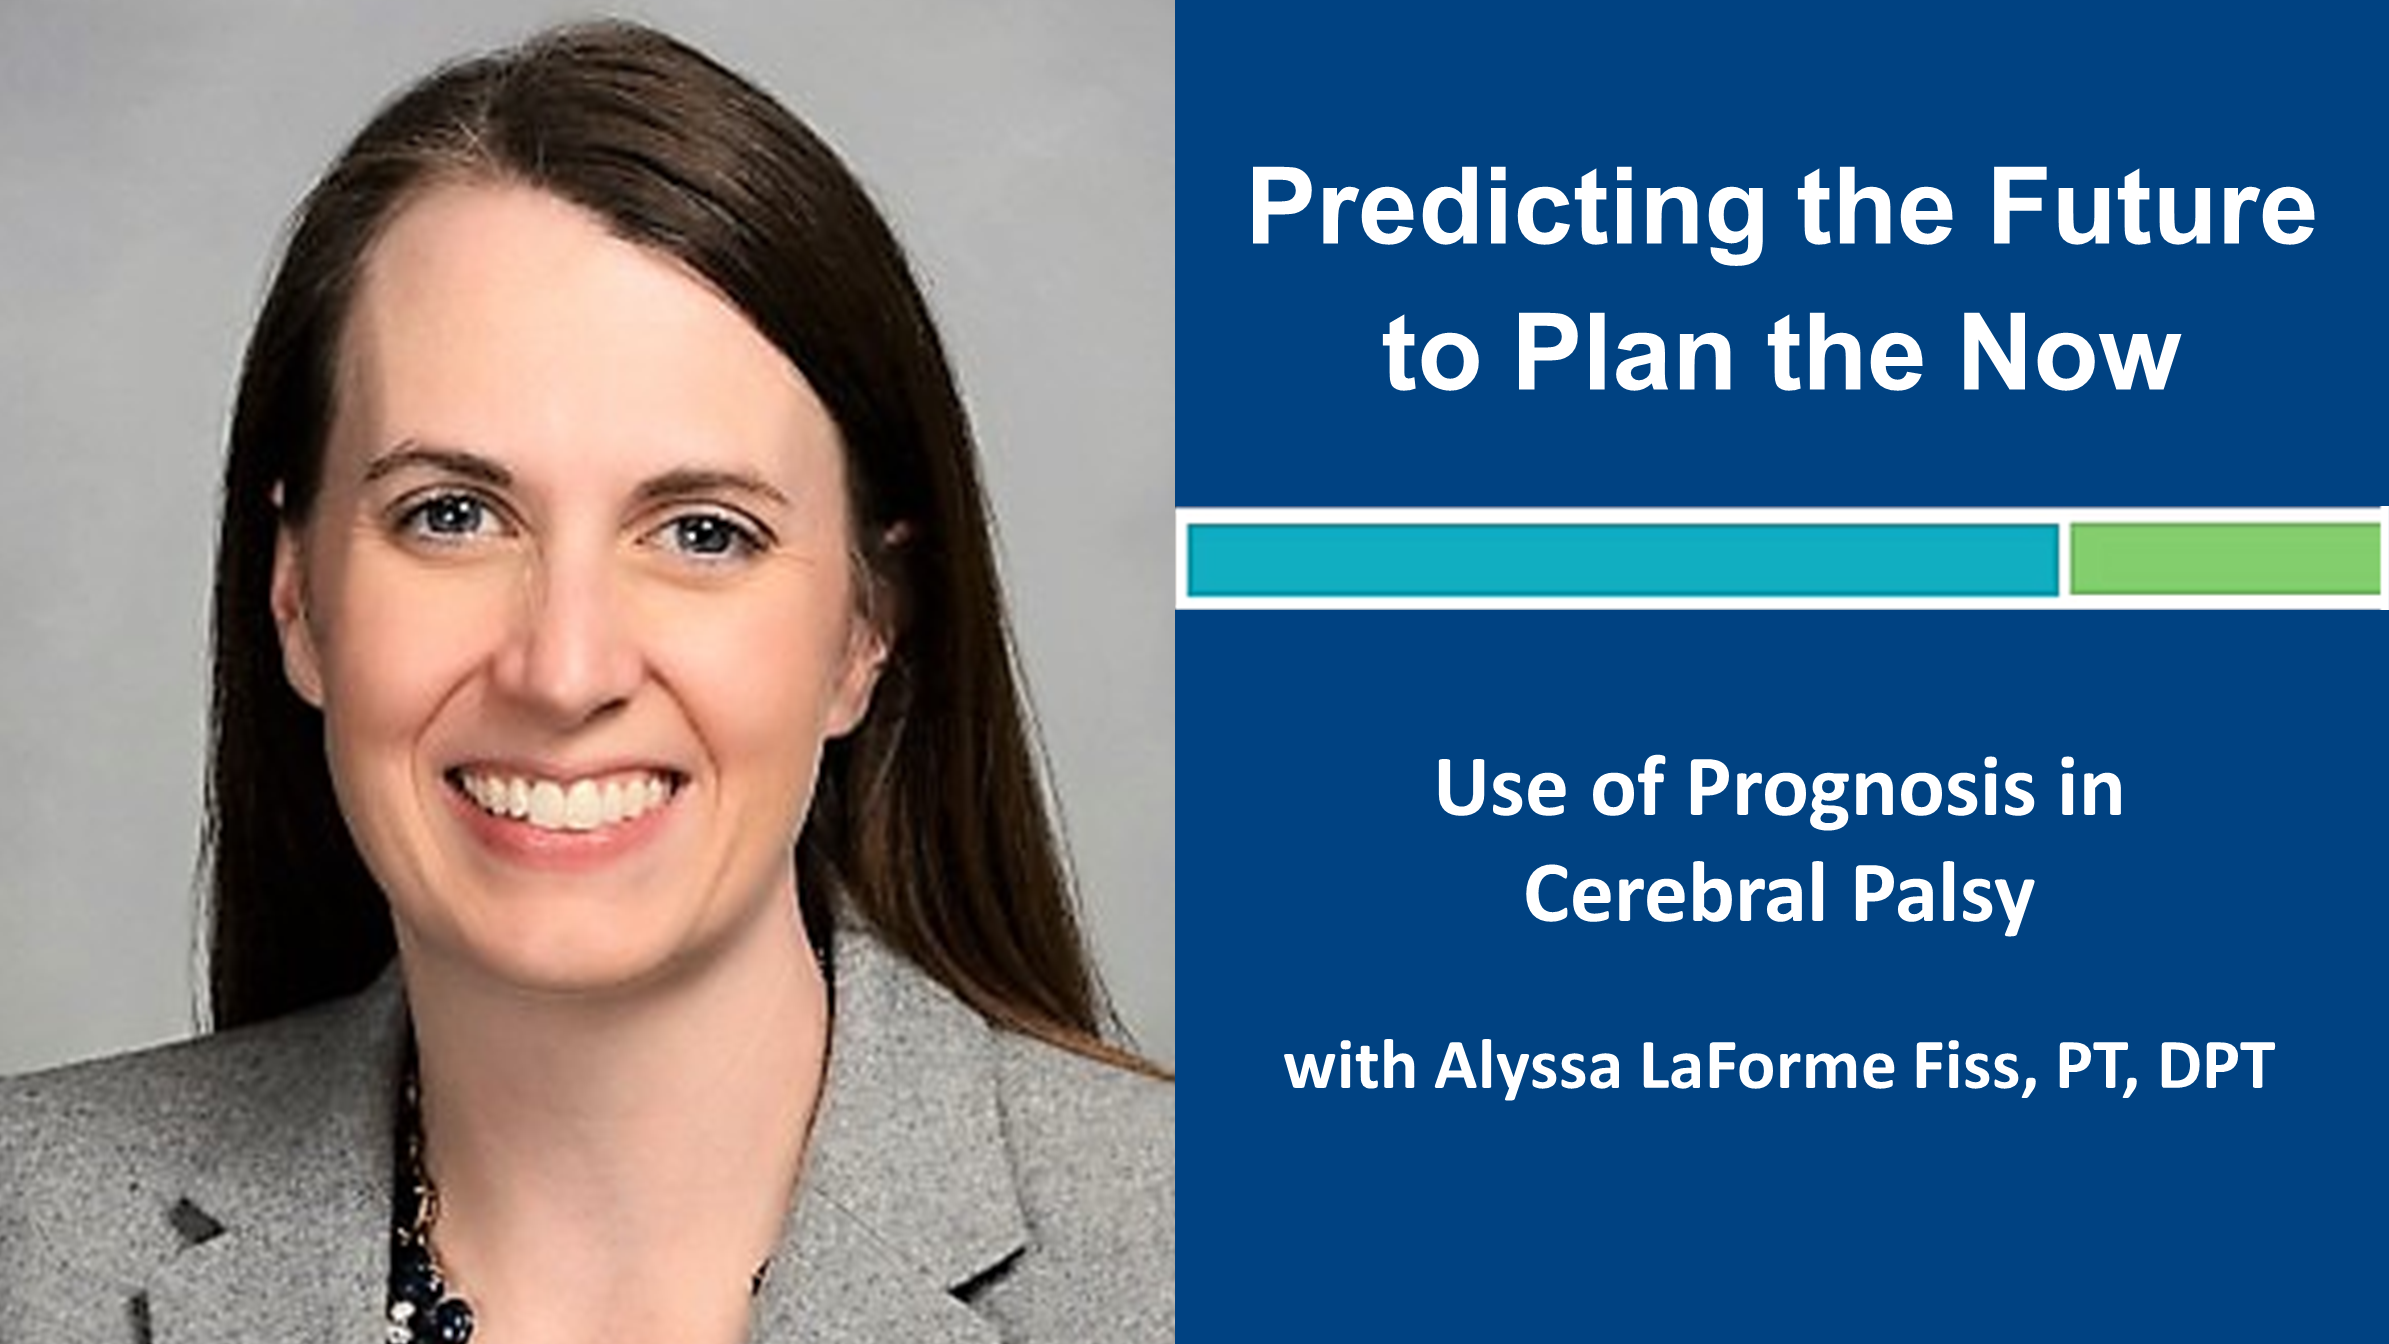 Webinar 2: Predicting the Future to Plan the Now - CP with Alyssa LaForme Fiss, PT, PhD